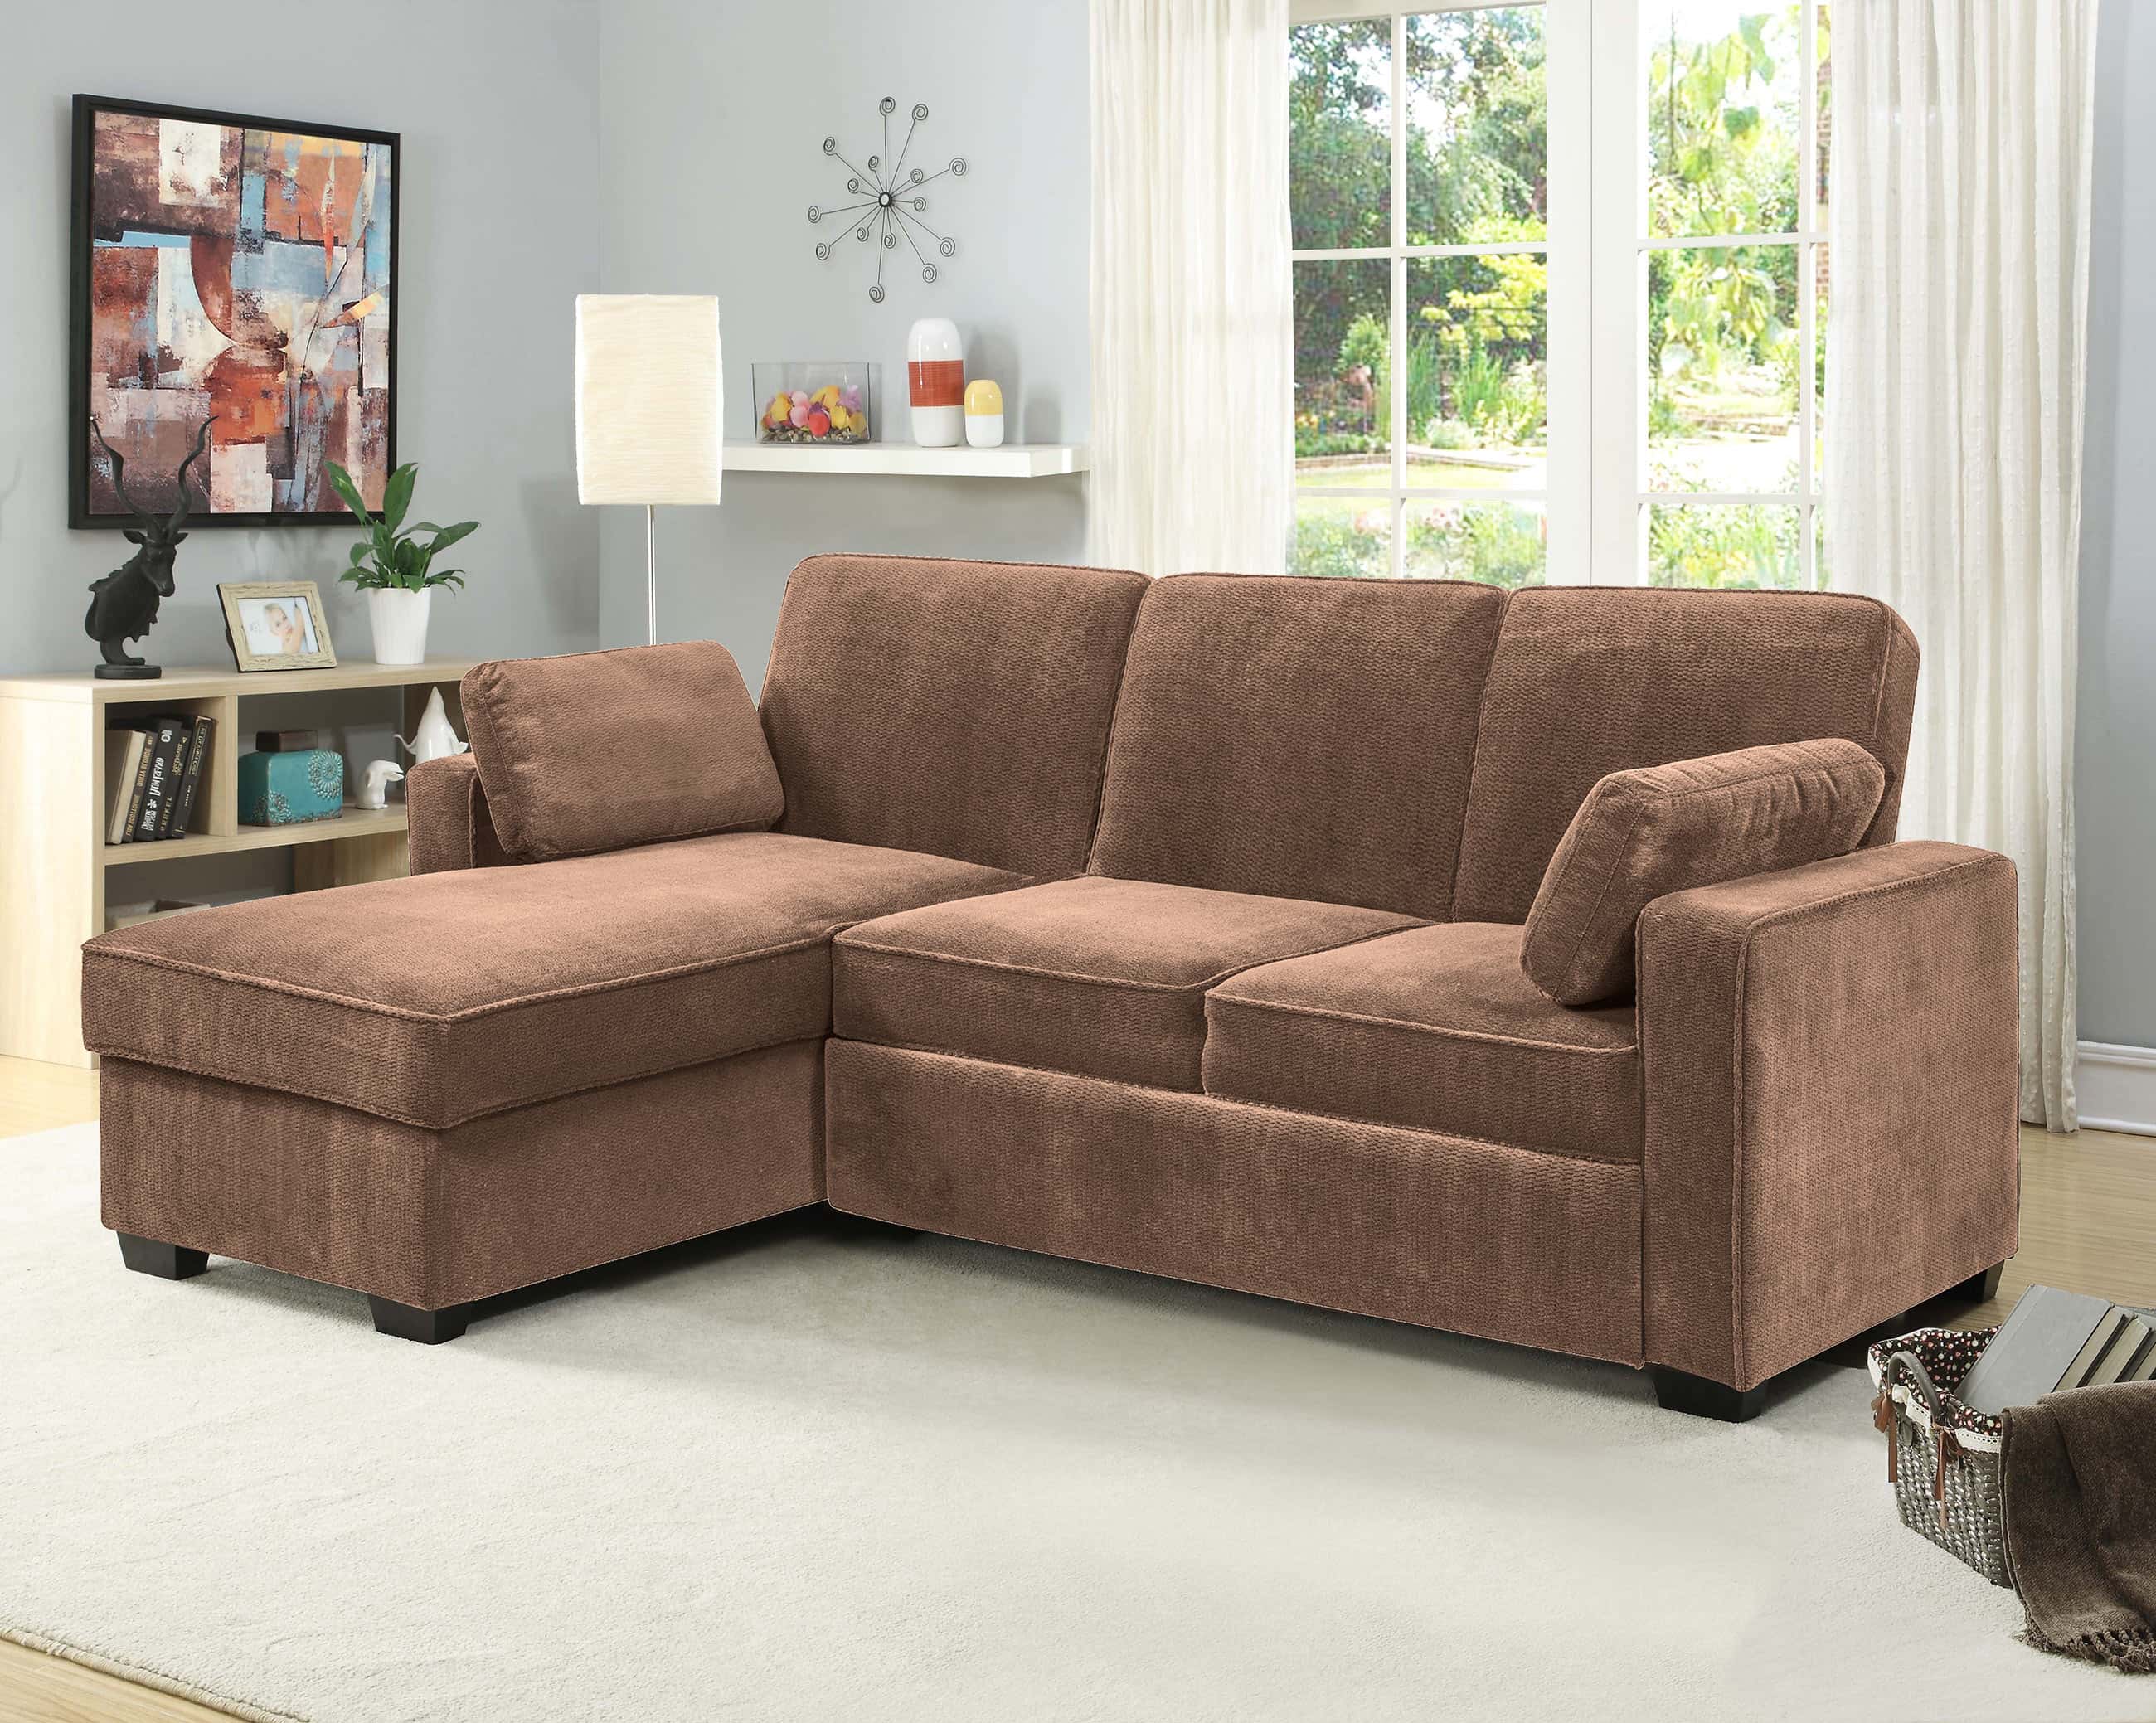 Chaela Sectional Convertible Sofa Light Brown by Serta Lifestyle